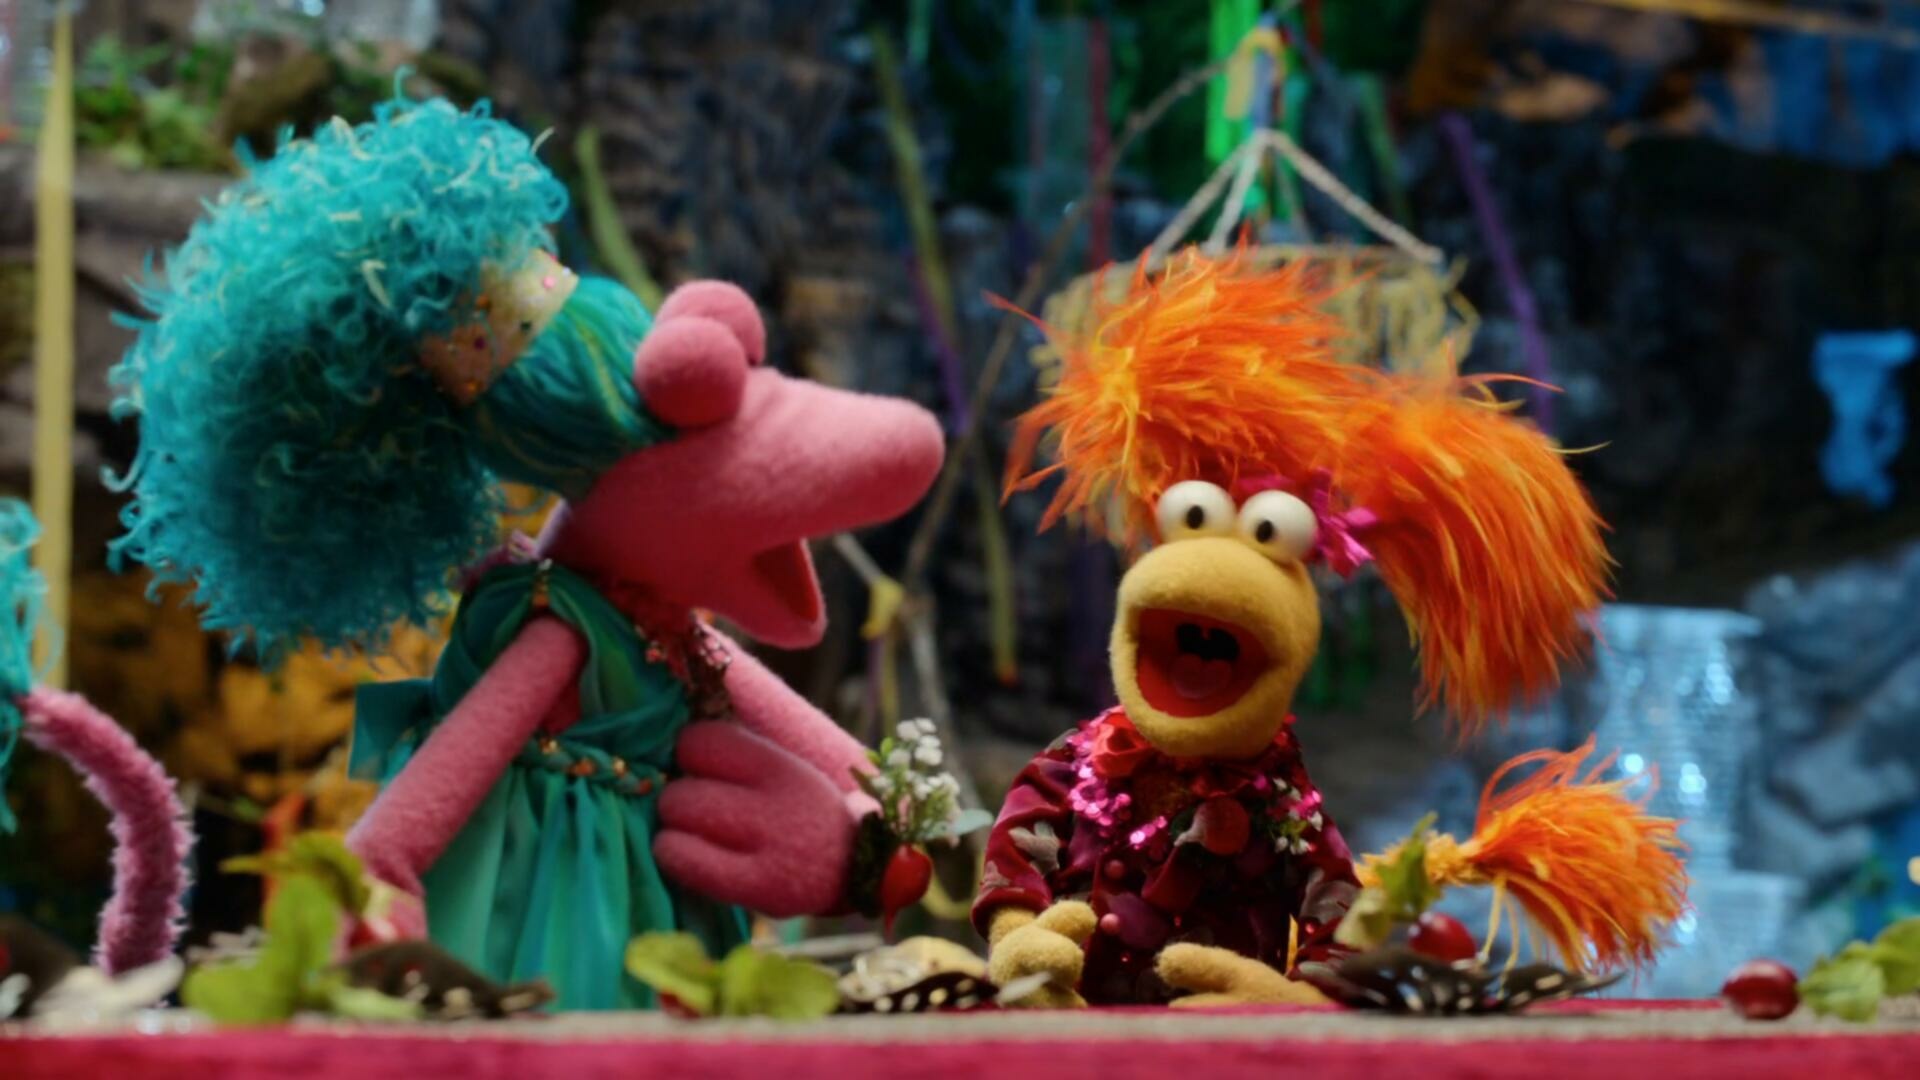 Fraggle Rock Back to the Rock S02E09 The Great Radish Ball 1080p ATVP WEB DL DDP5 1 Atmos H 264 FLUX